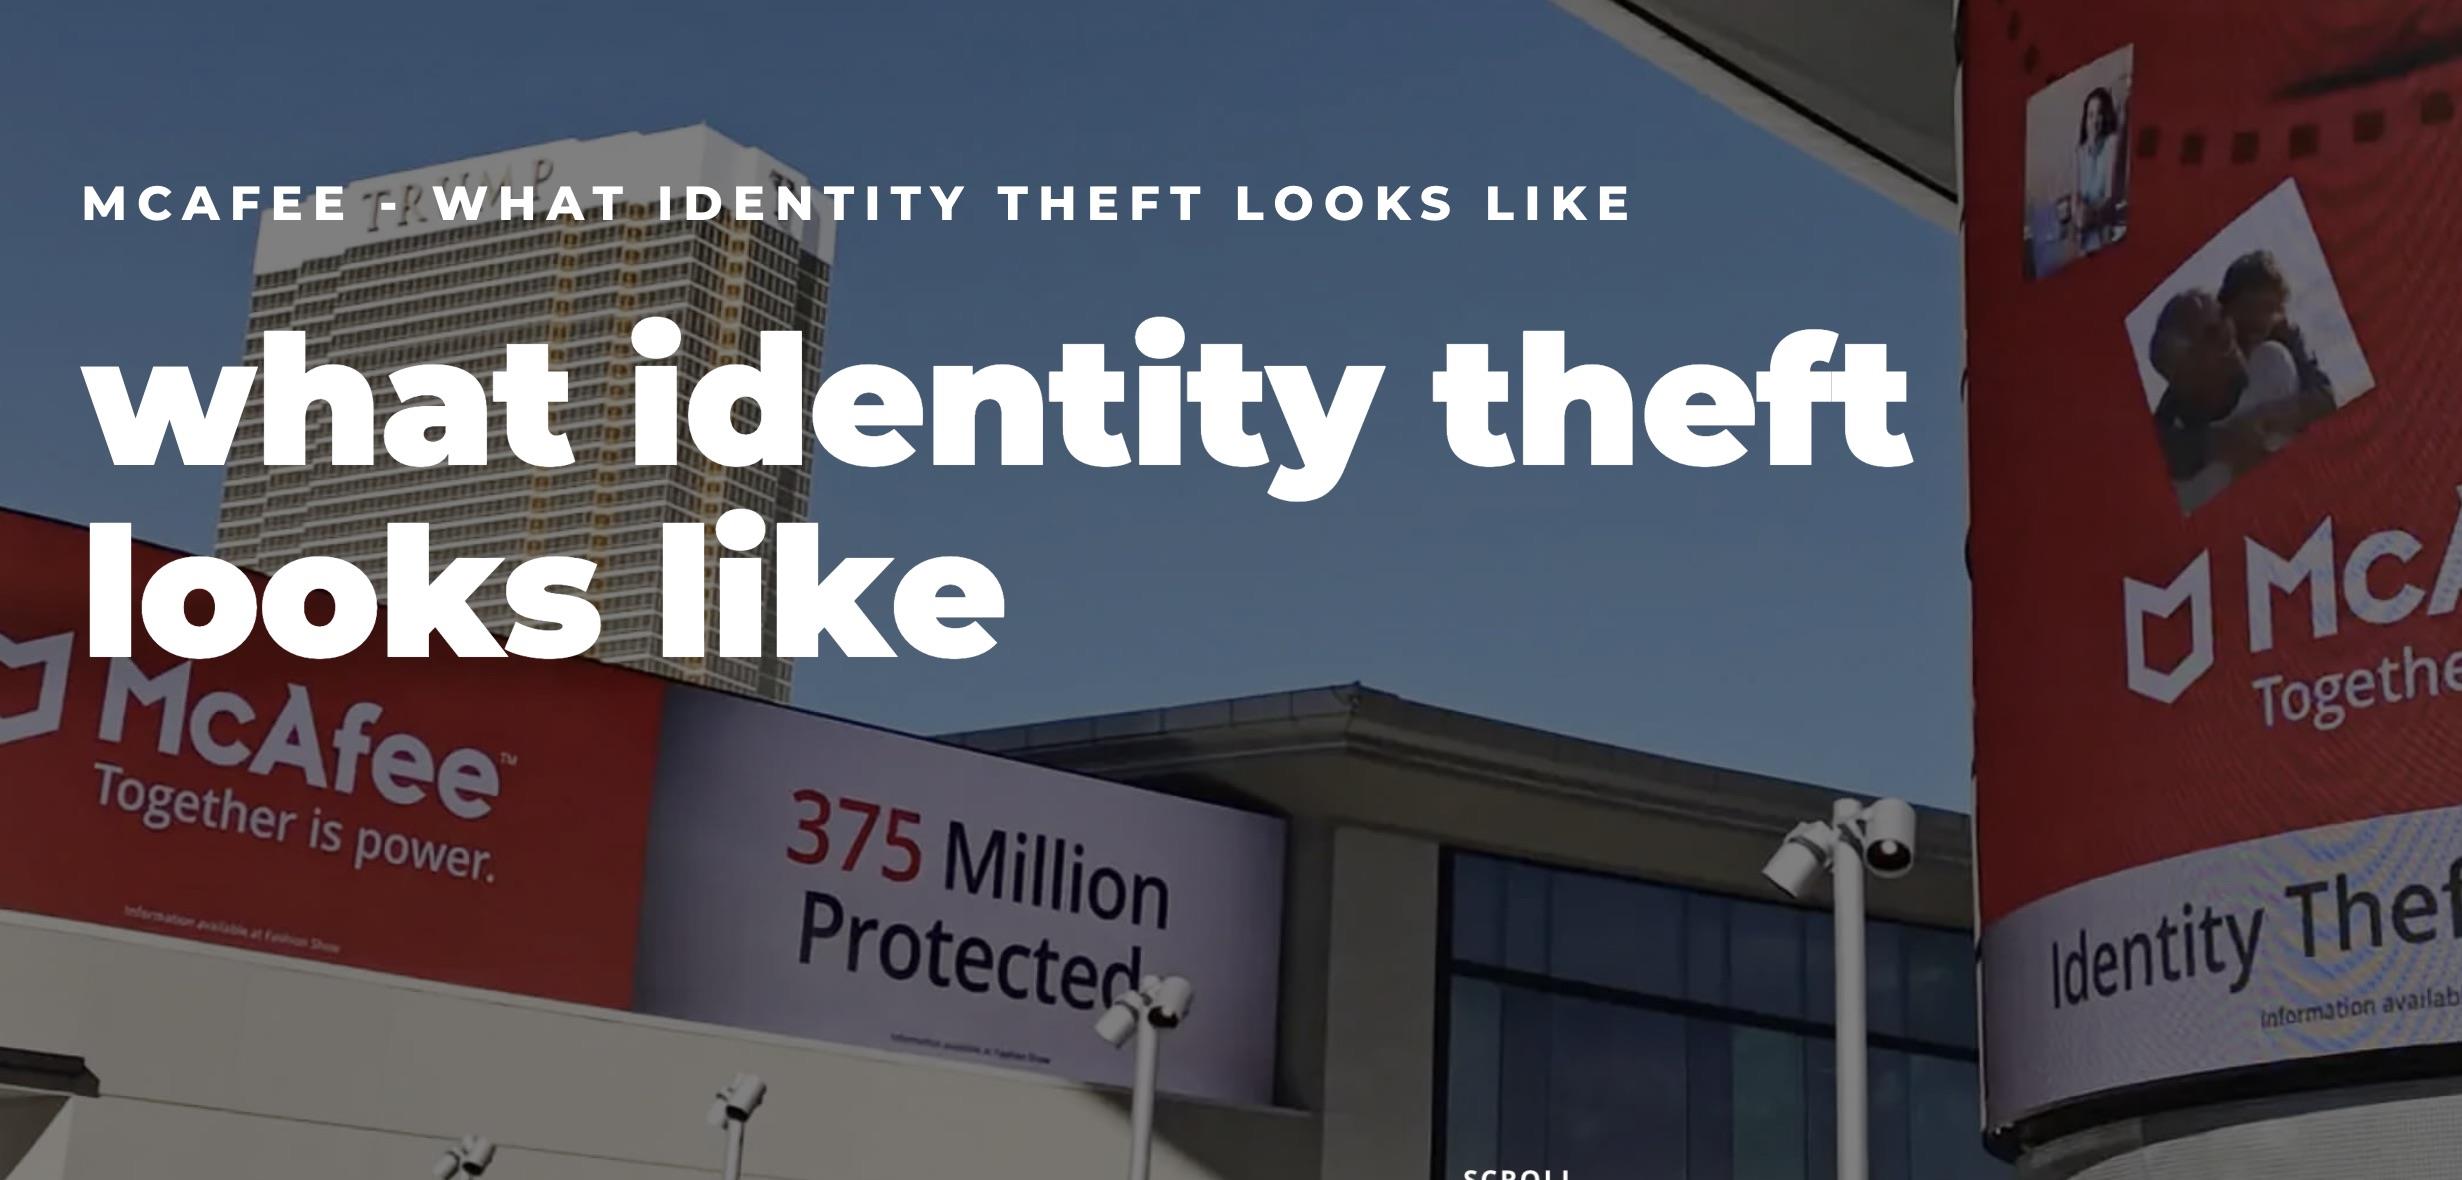 McAfee—What Identity Theft Looks Like